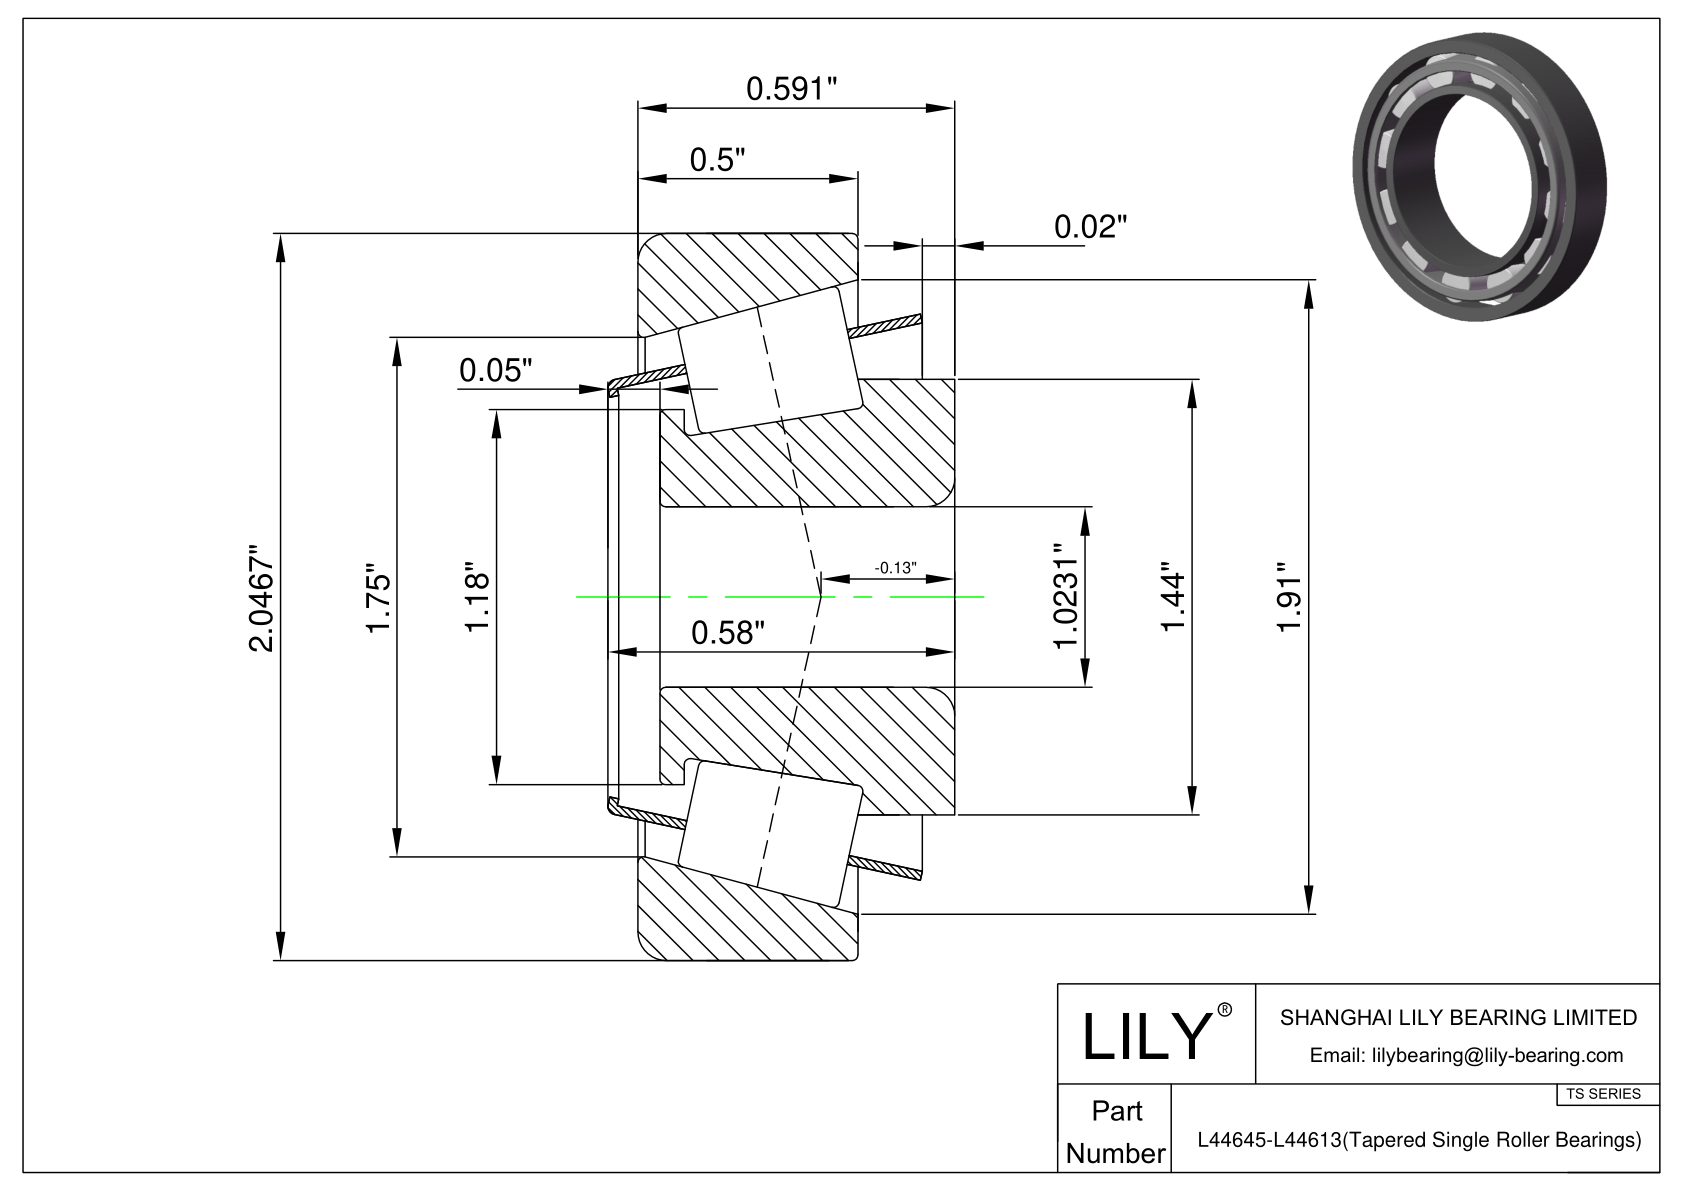 L44645-L44613 TS (Tapered Single Roller Bearings) (Imperial) cad drawing